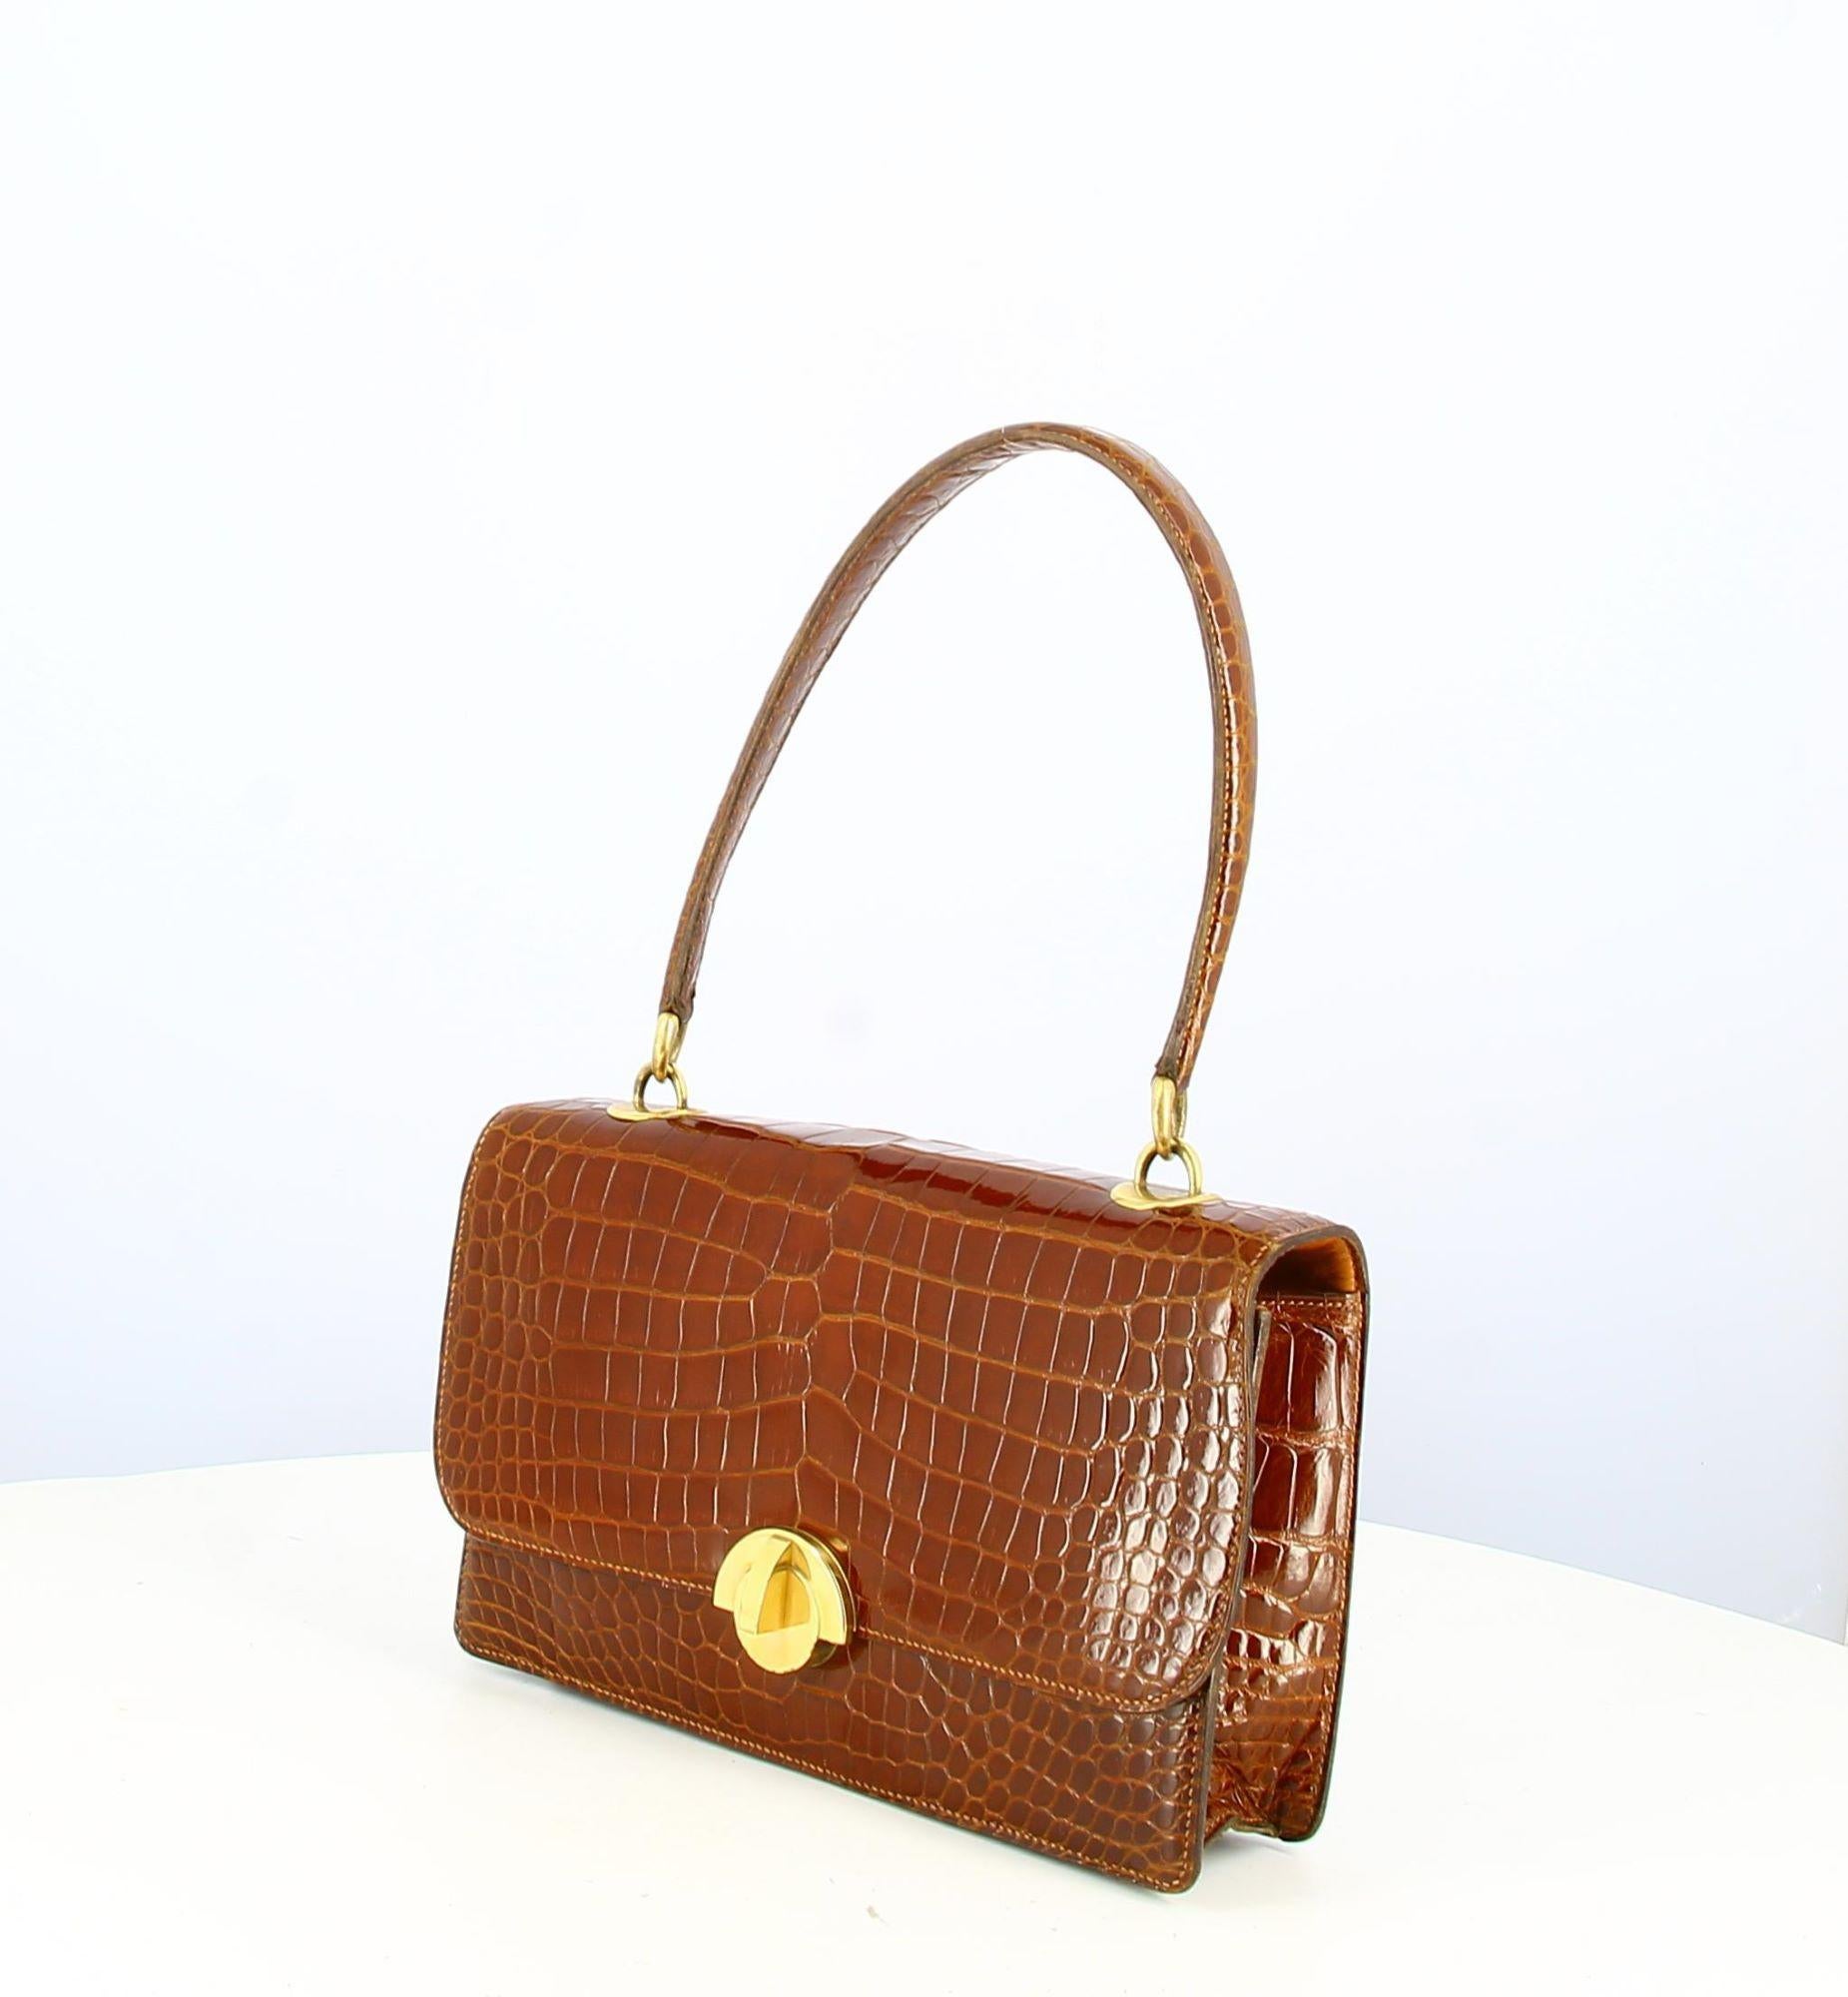 

Handbag Hermes Croco Brown

- Good condition, with slight traces of wear and tear over time.
- Hermes handbag, brown crocodile, golden clasp, small hanses to wear crocodile leather shoulder.
- The interior is in brown leather. Two parts, three